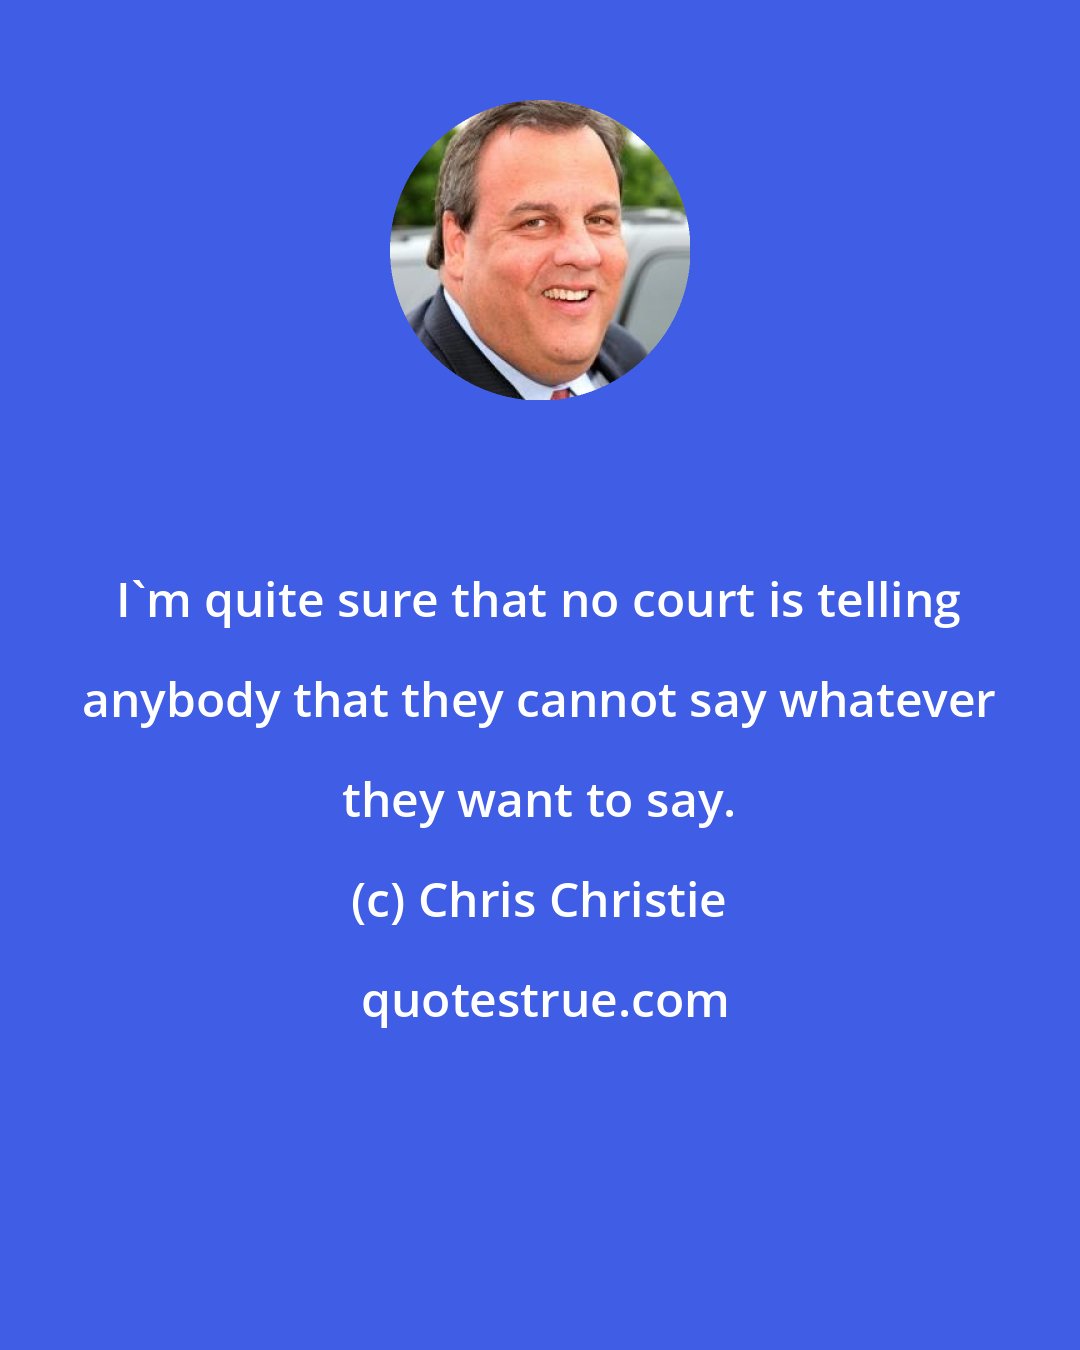 Chris Christie: I'm quite sure that no court is telling anybody that they cannot say whatever they want to say.